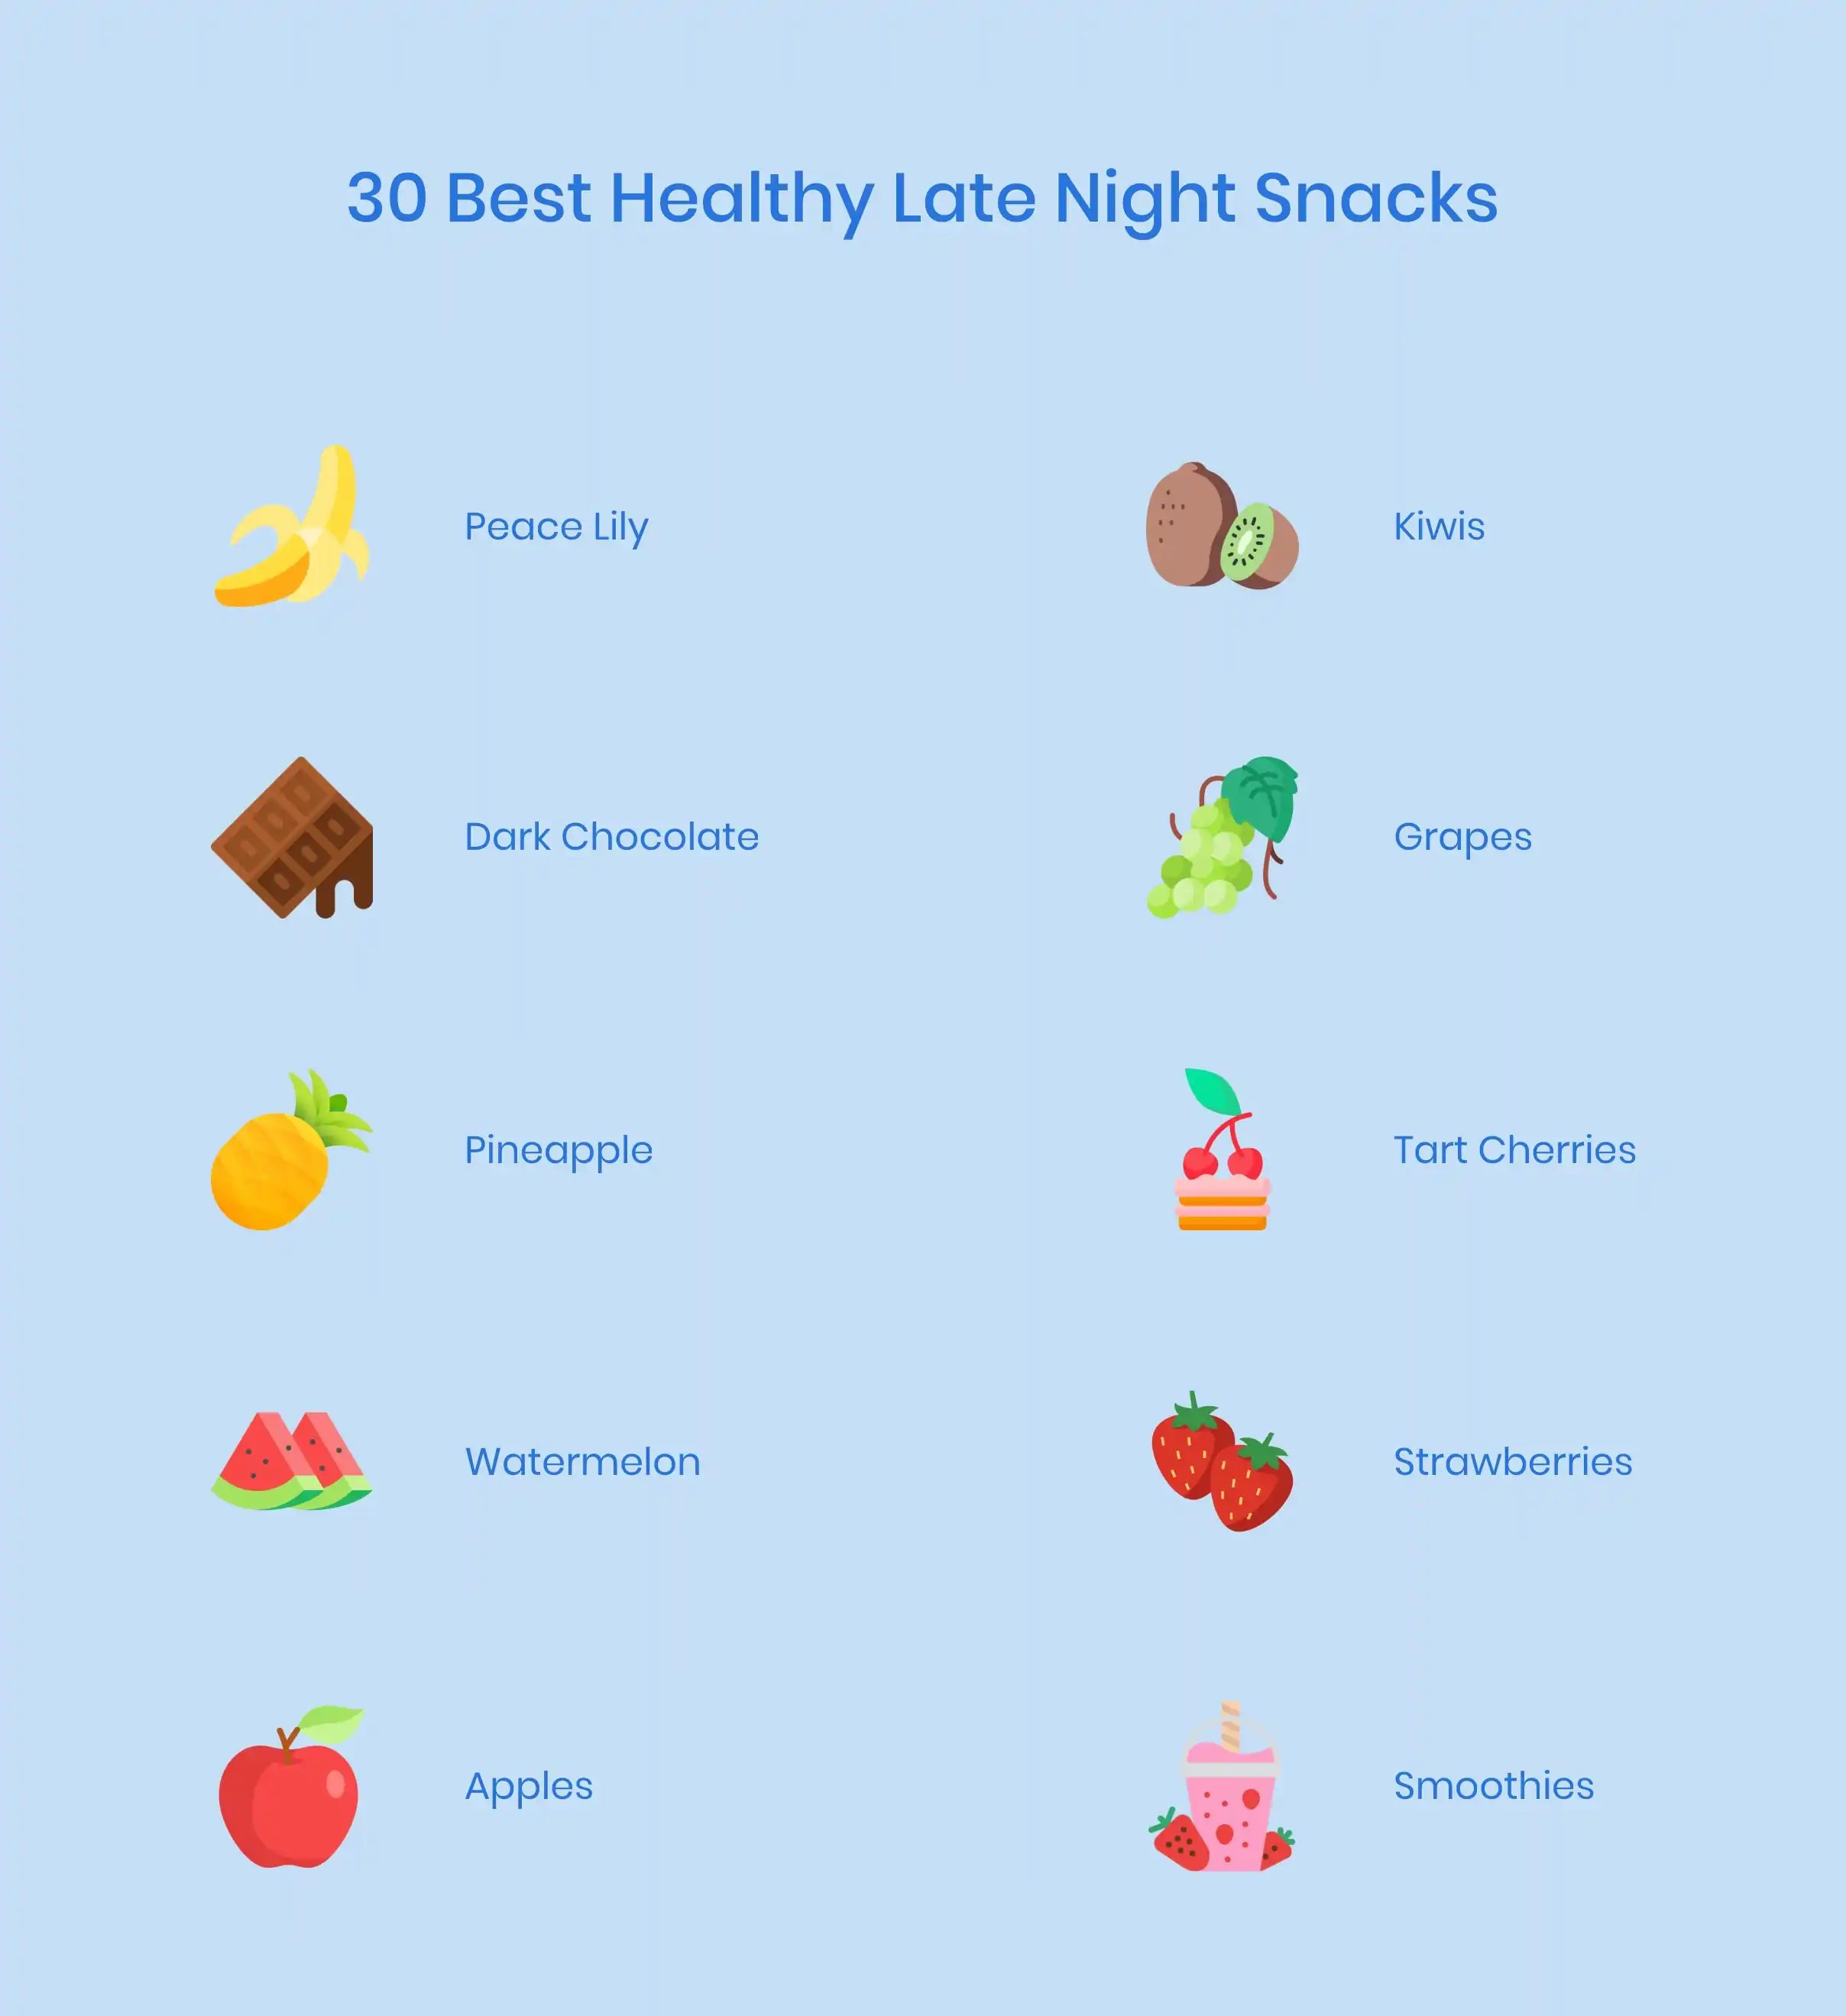 5 Simple Hacks To Curb Late-Night Cravings And Stay Healthy